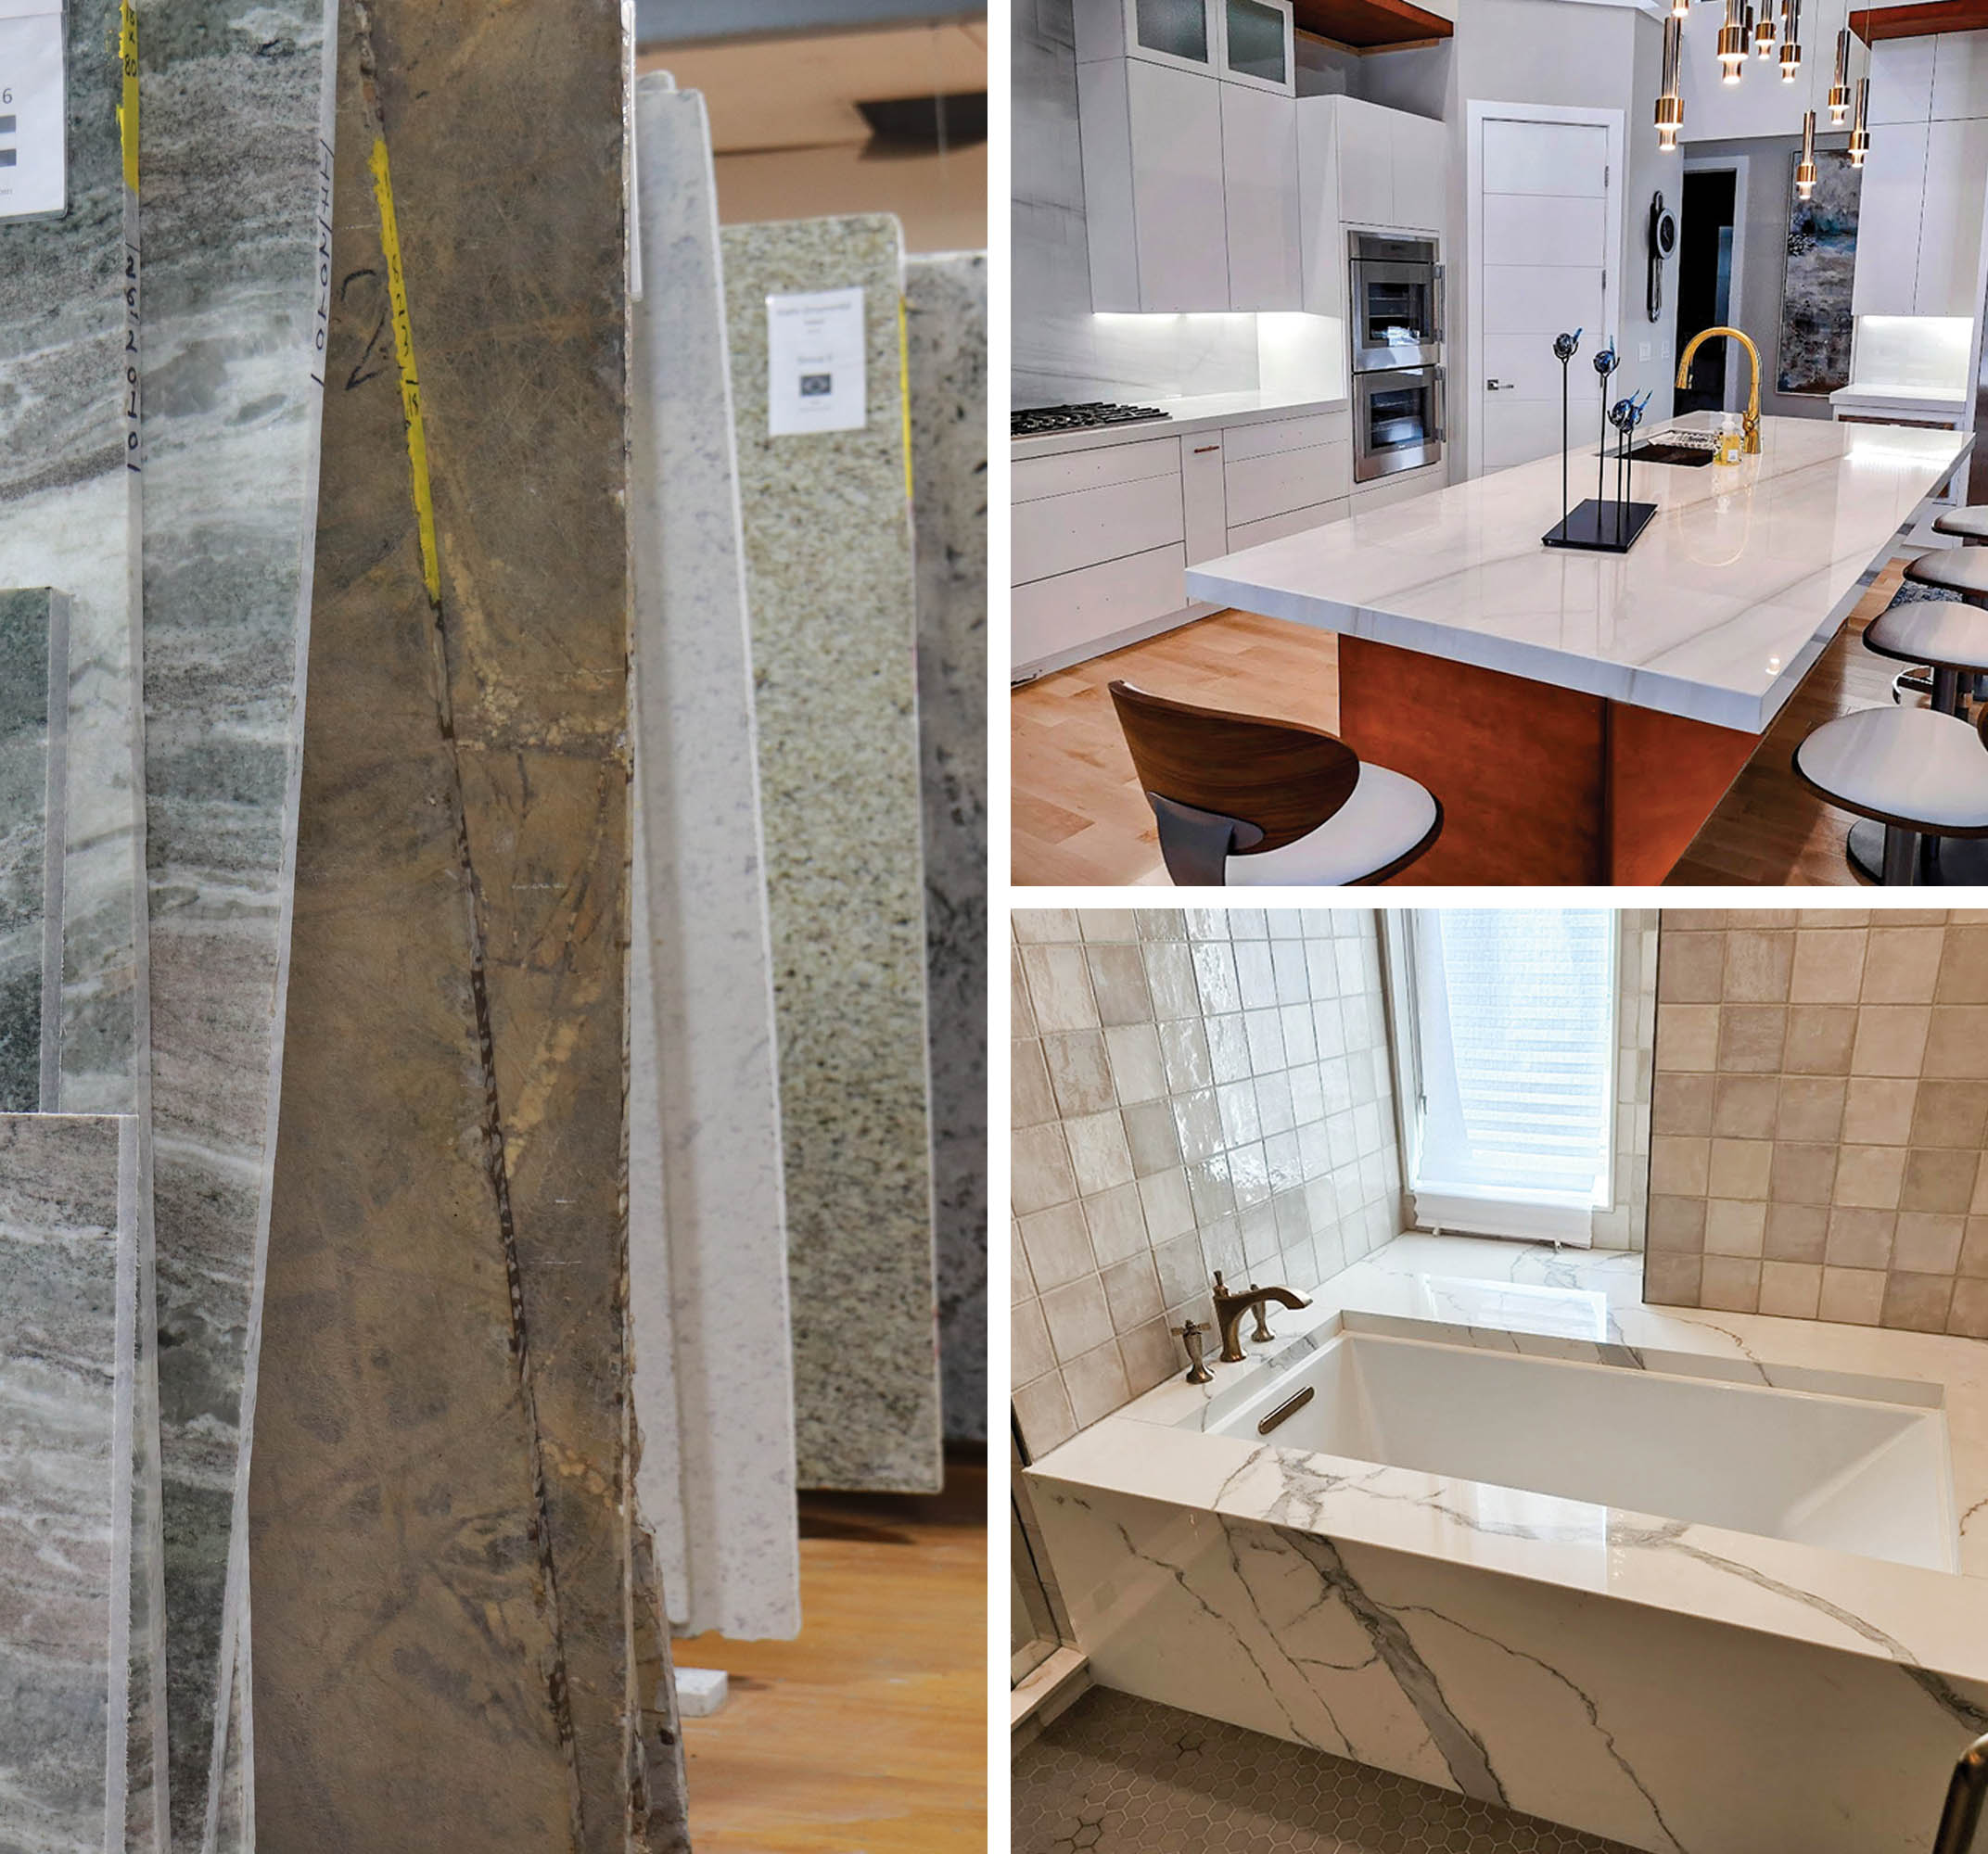 A collage of images. Starting from left are slabs of granite inside a warehouse. Top right is a white kitchen with a marble-topped island. Right bottom is a large bathtub with a marble surround.